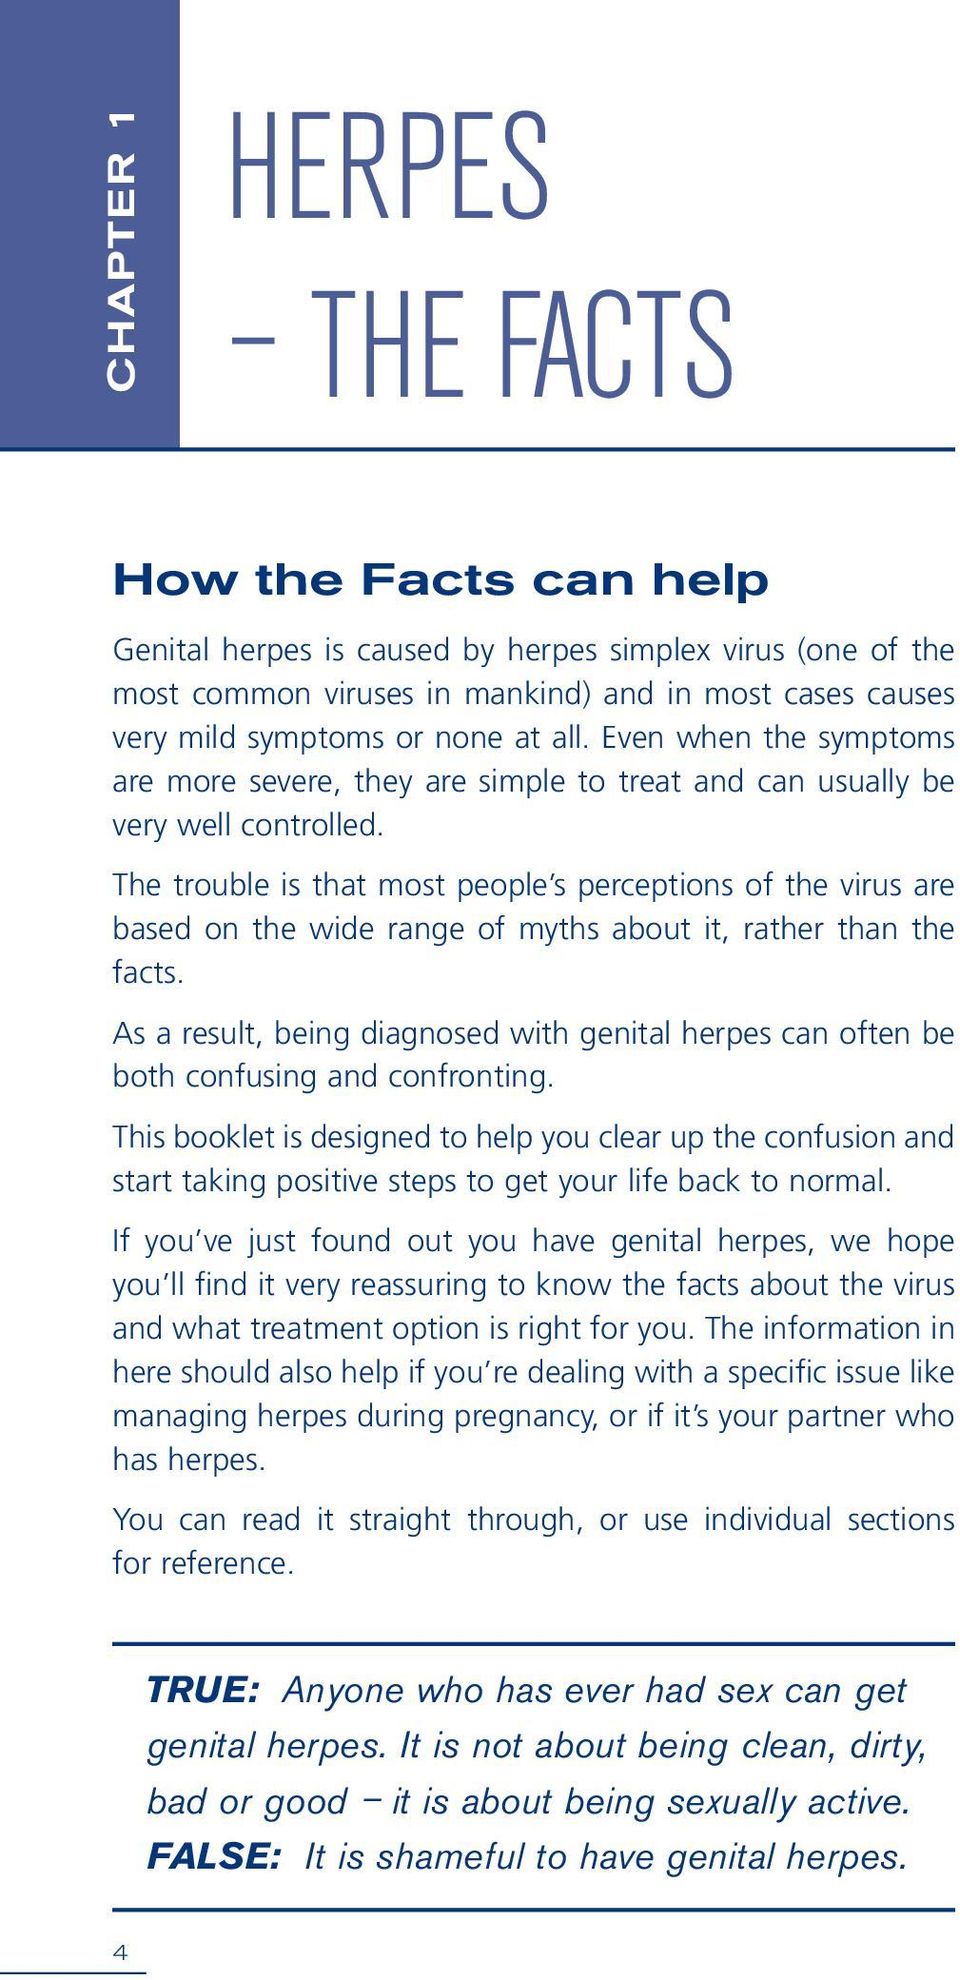 The trouble is that most people s perceptions of the virus are based on the wide range of myths about it, rather than the facts.